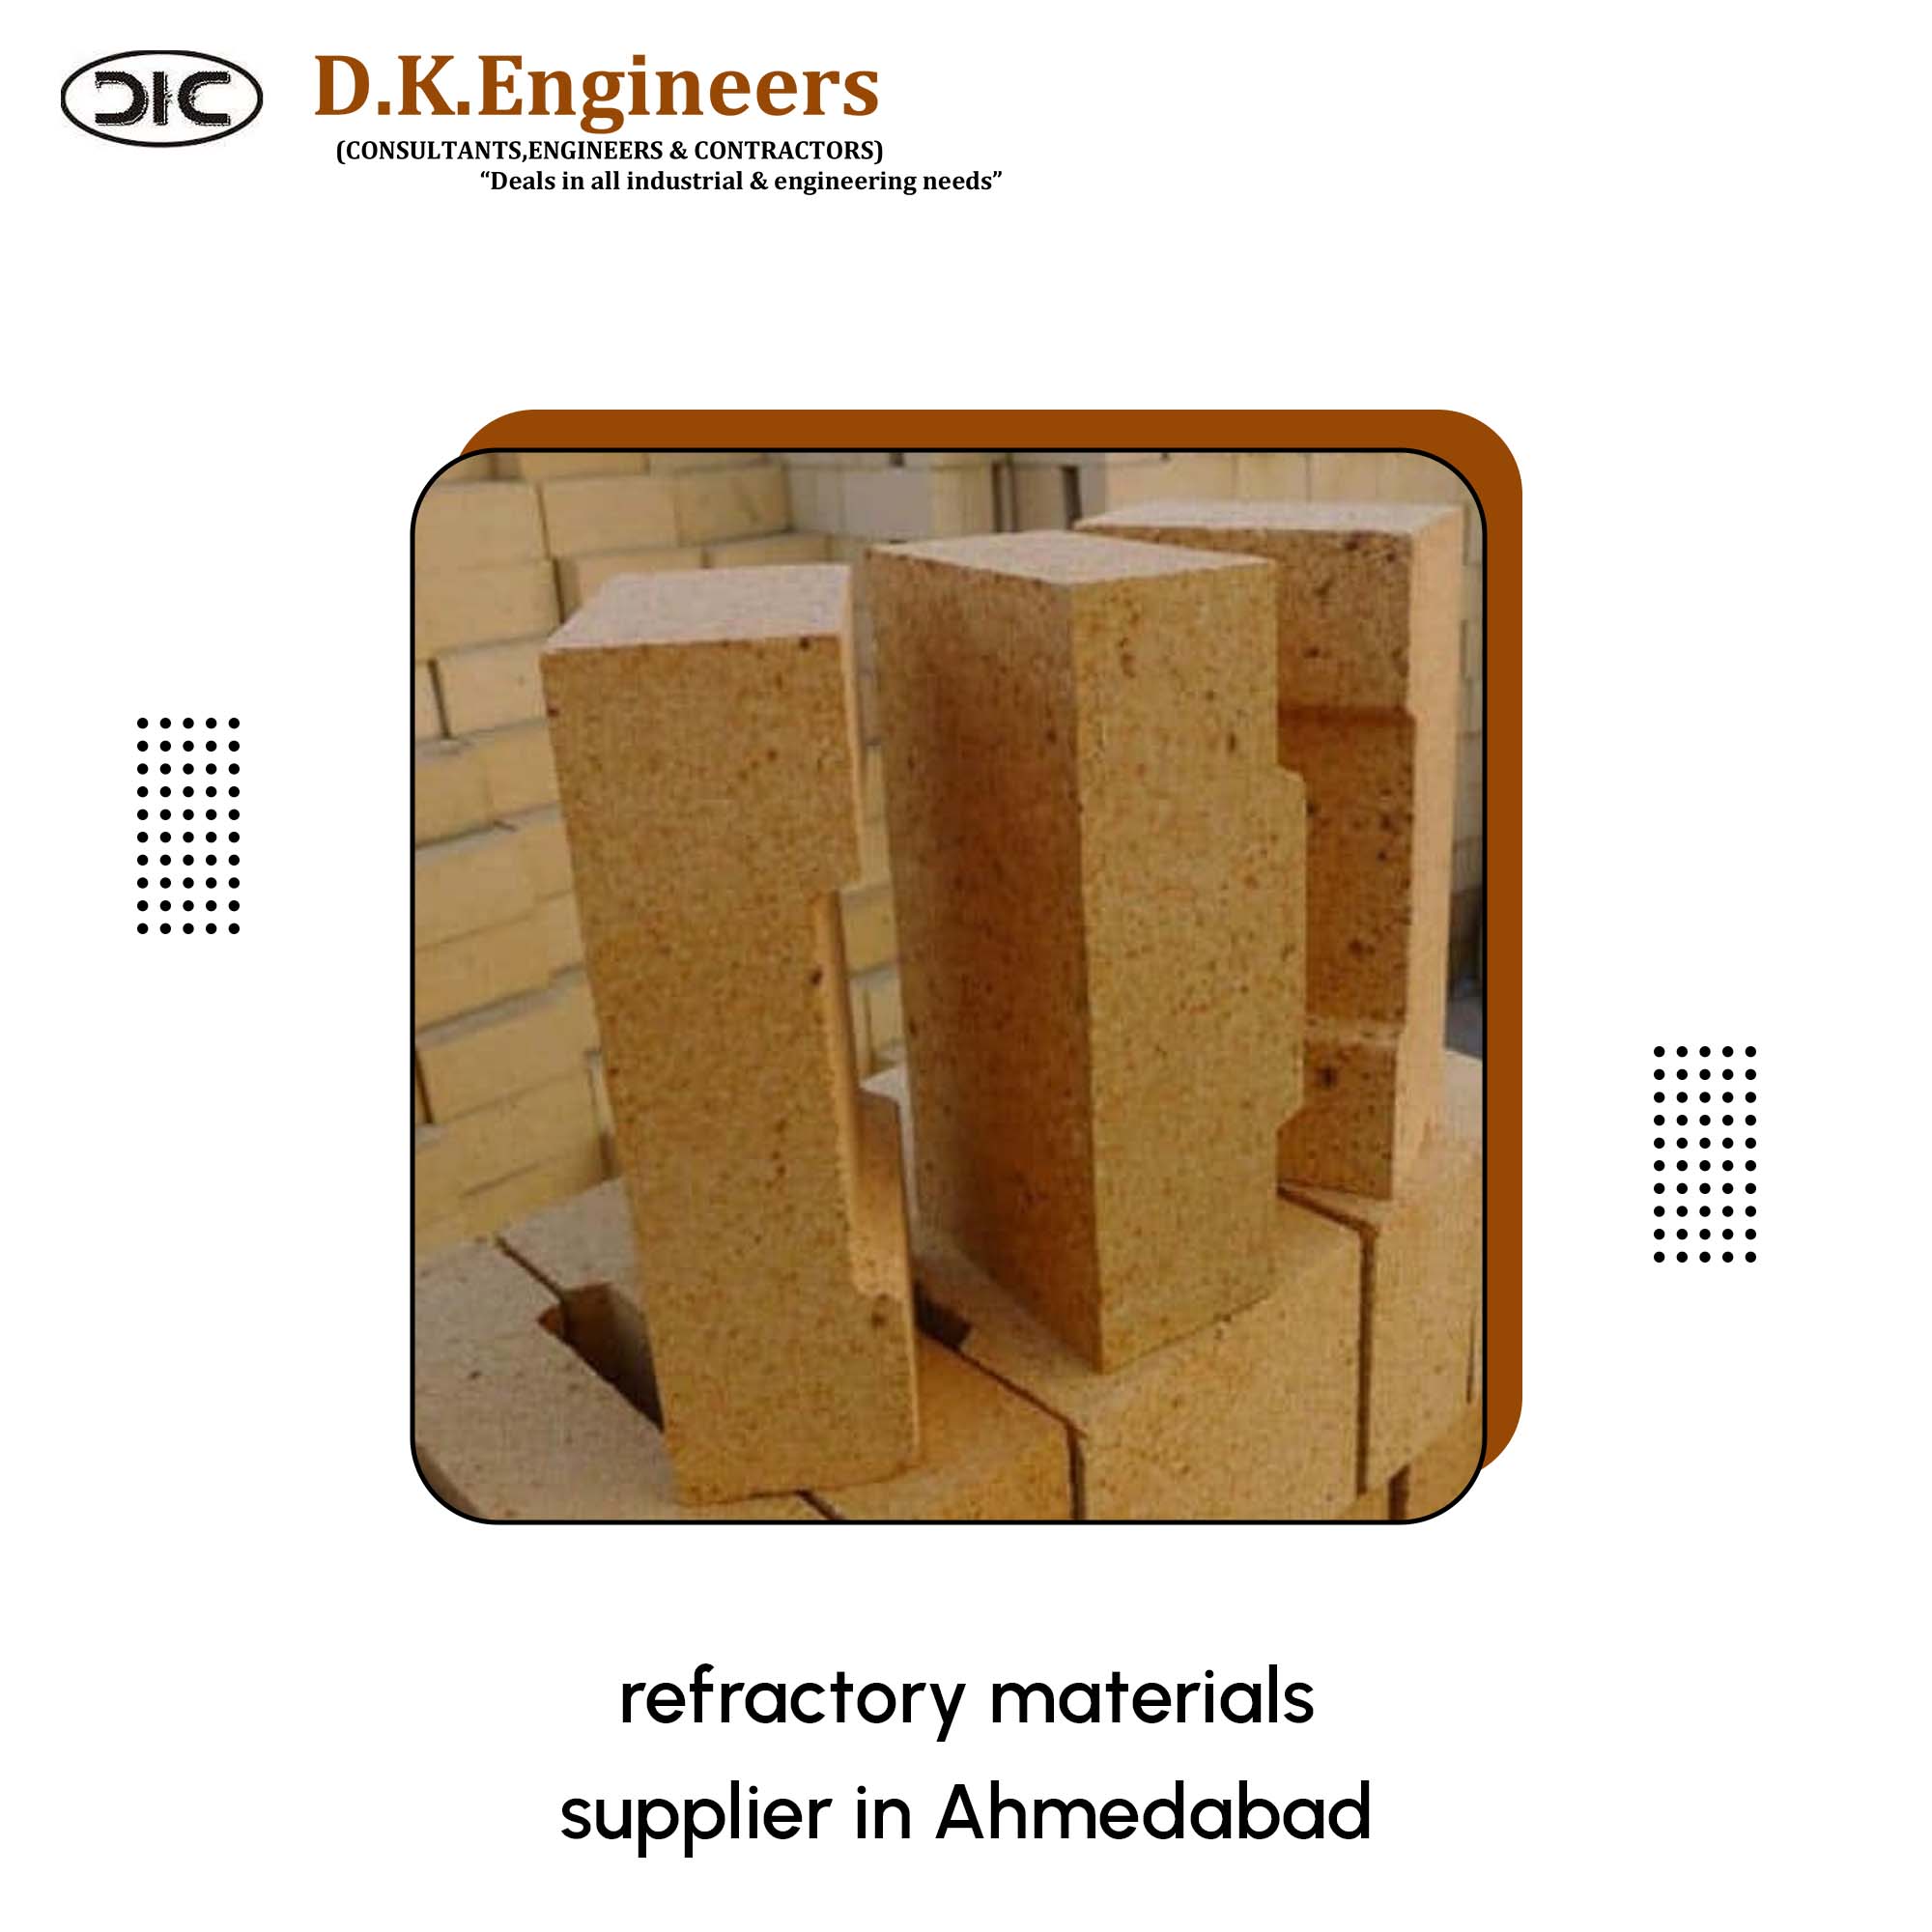 refractory materials supplier in Ahmedabad